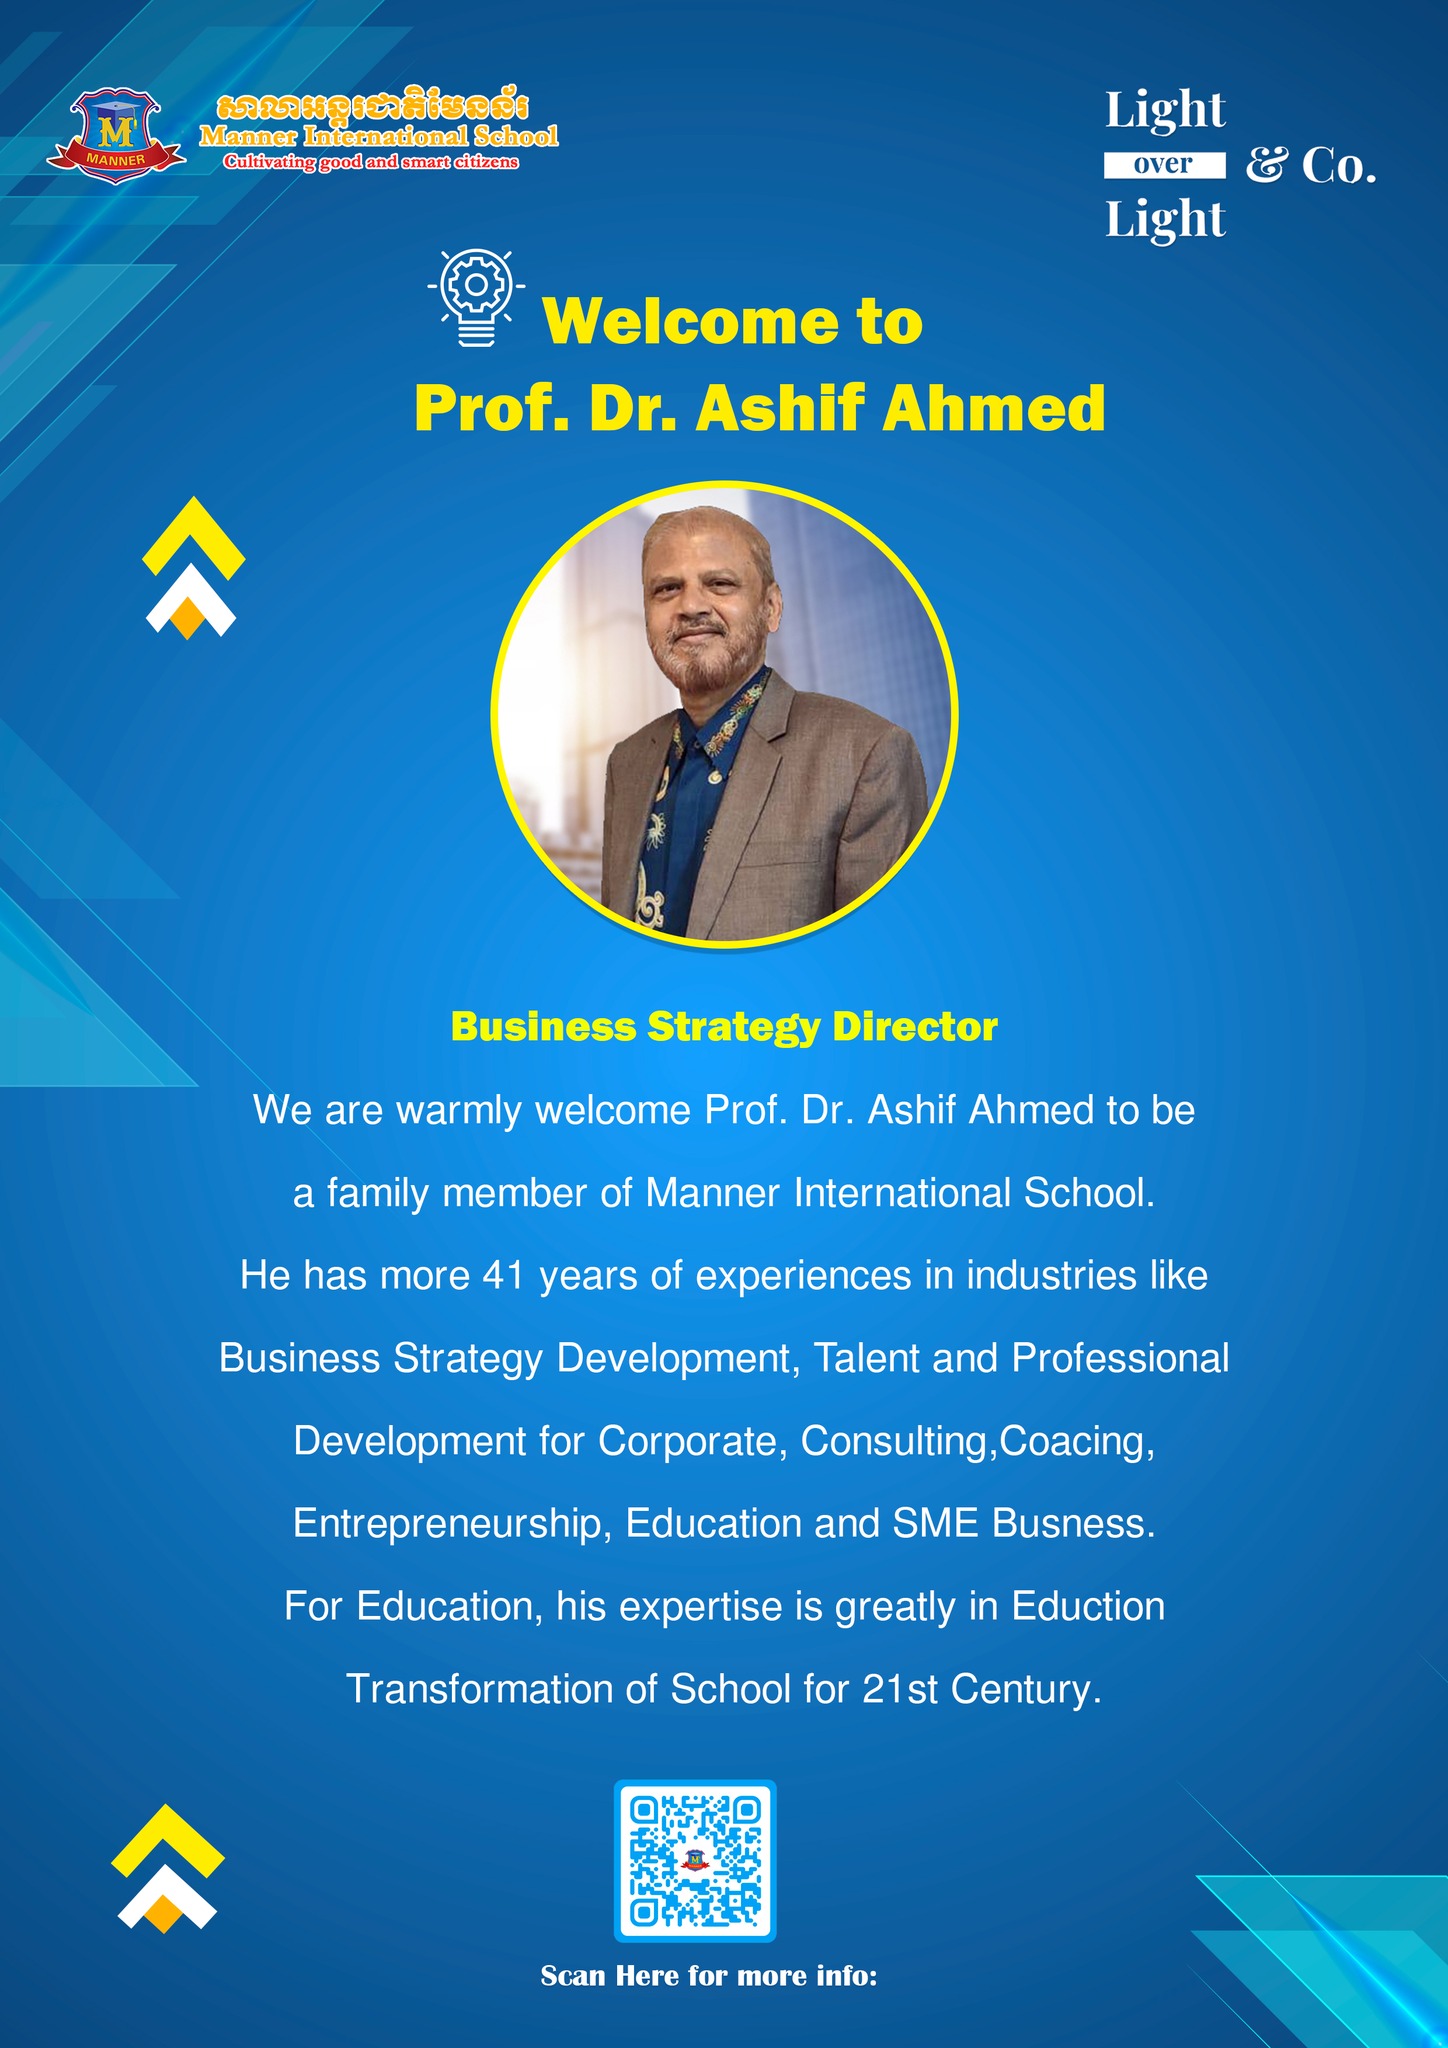 Welcome to Prof. Dr. Ashif Ahmed, Business Strategy Director of Manner International School